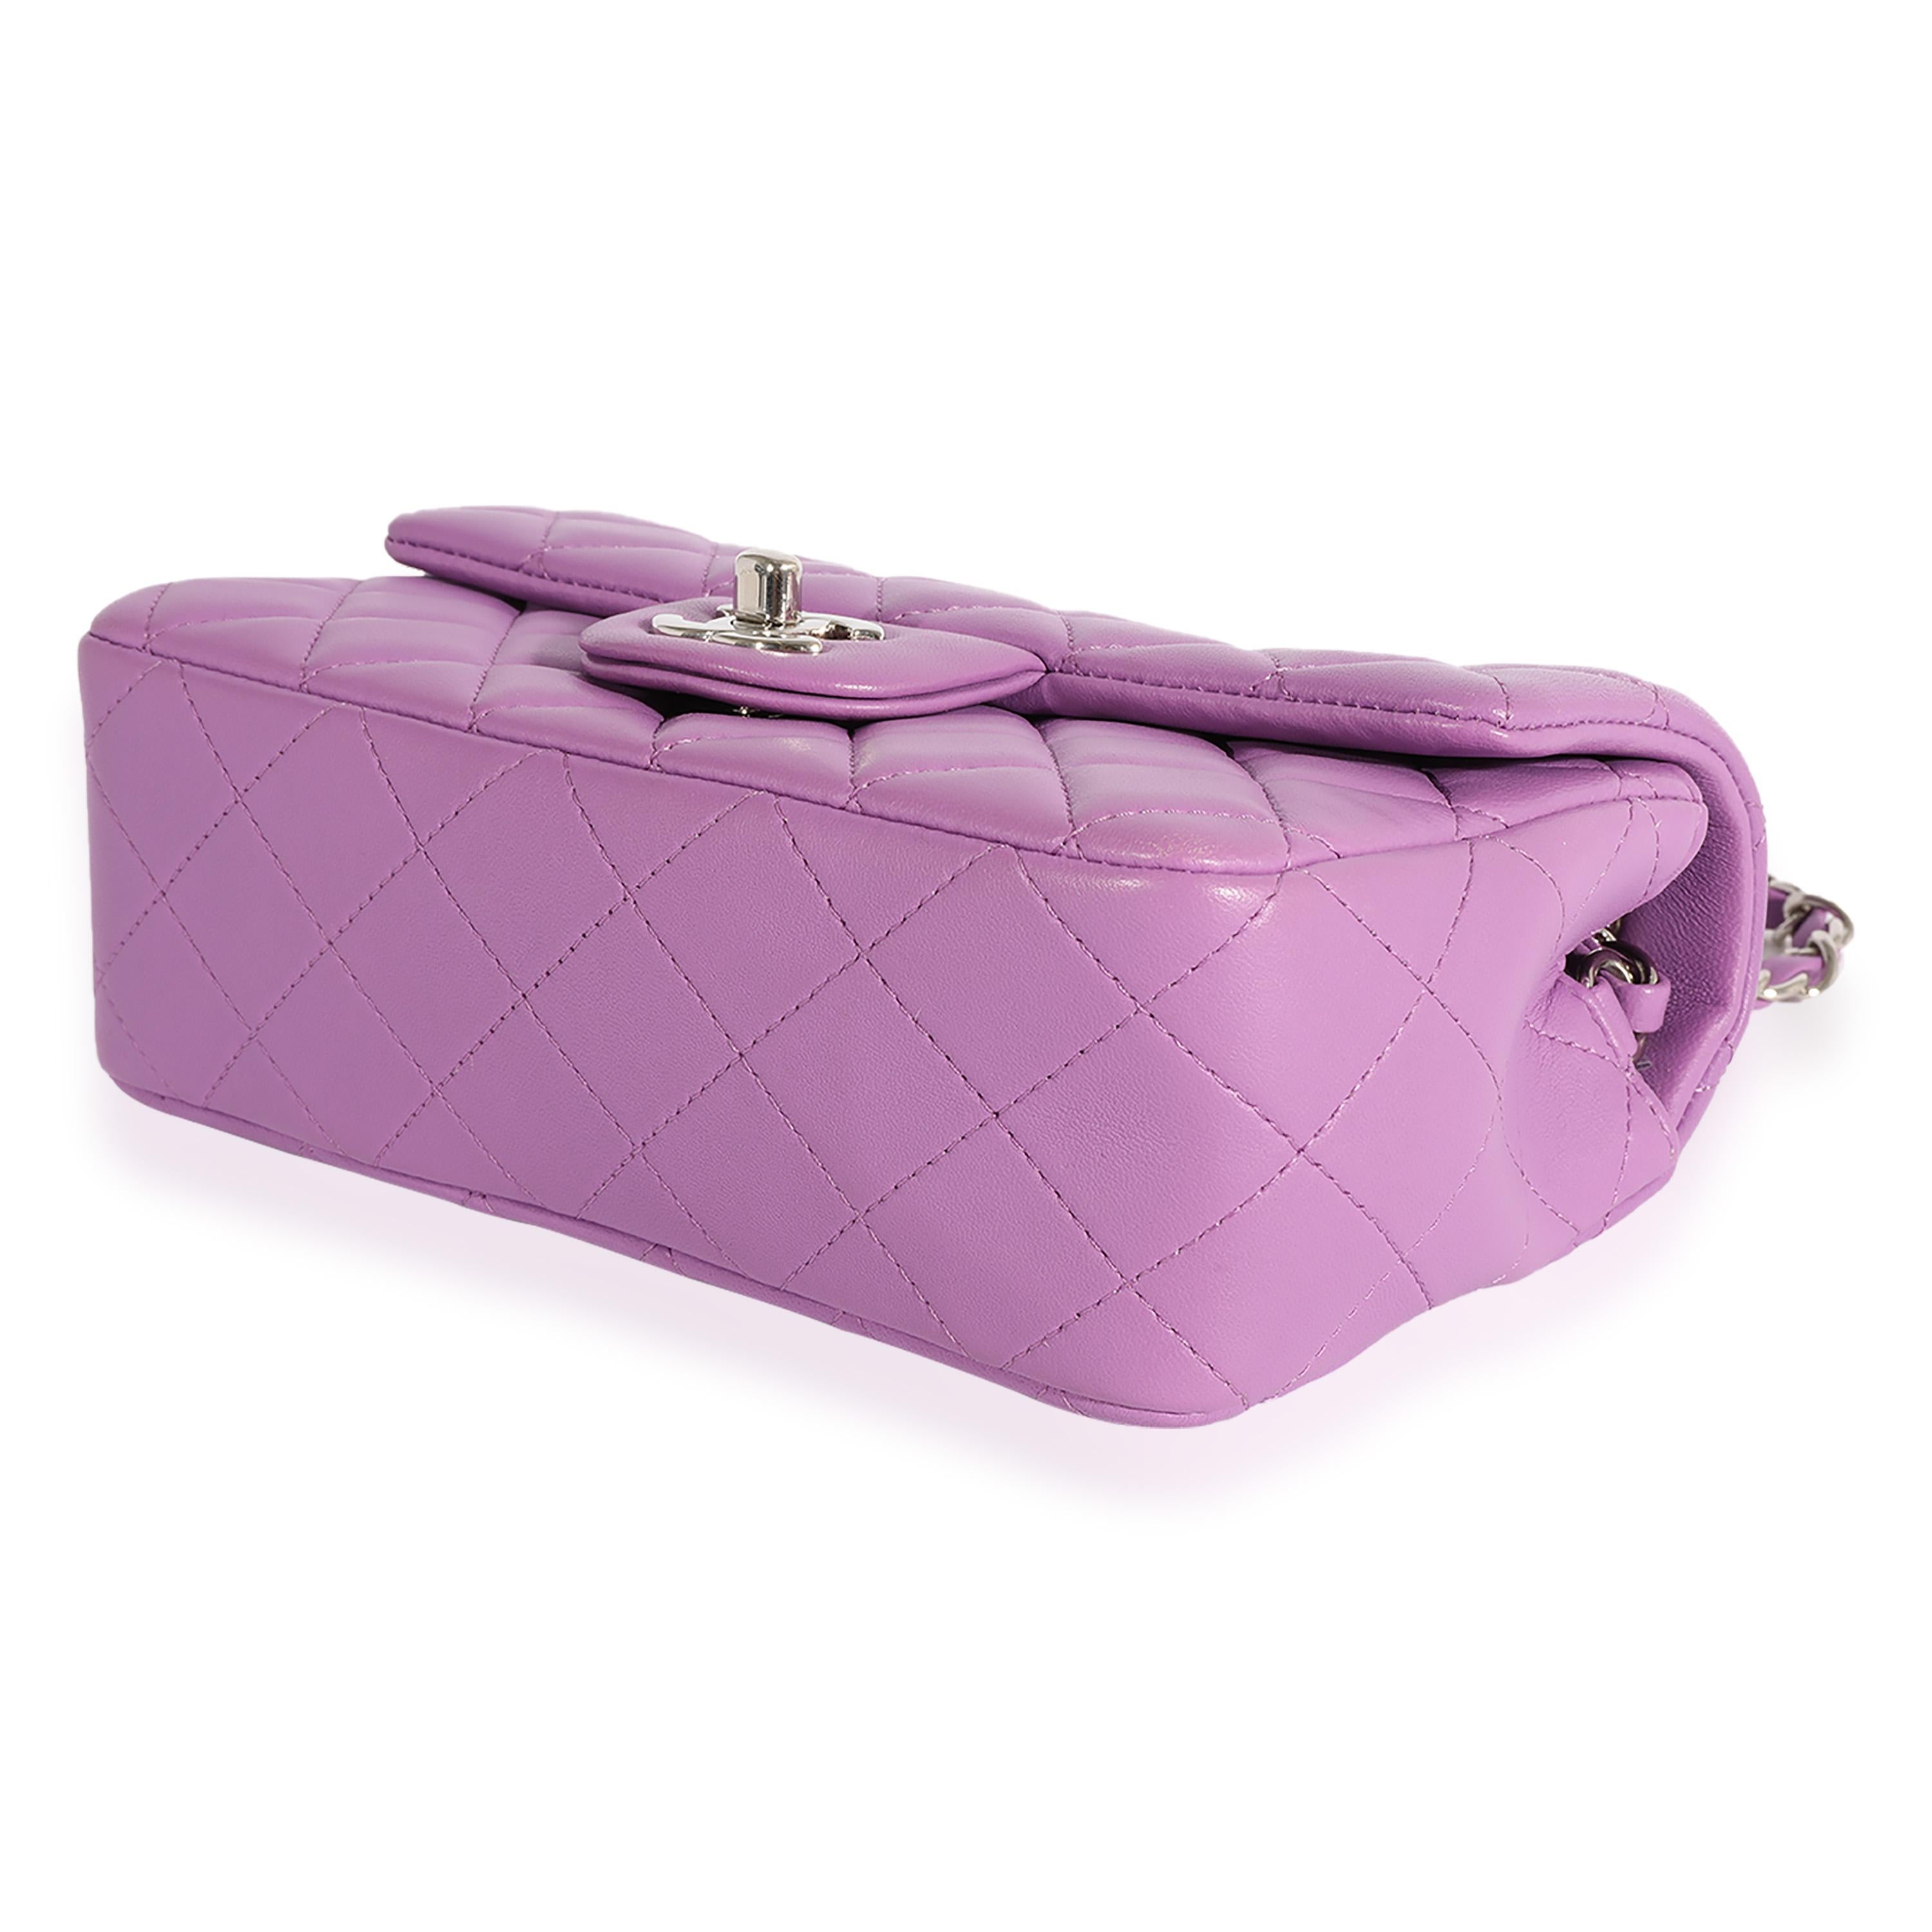 Listing Title: Chanel Purple Quilted Lambskin Mini Rectangular Classic Flap Bag
SKU: 123923
Condition: Pre-owned 
Handbag Condition: Excellent
Condition Comments: Excellent Condition. Scratching to hardware. Tiny scuff at underflap. No other visible